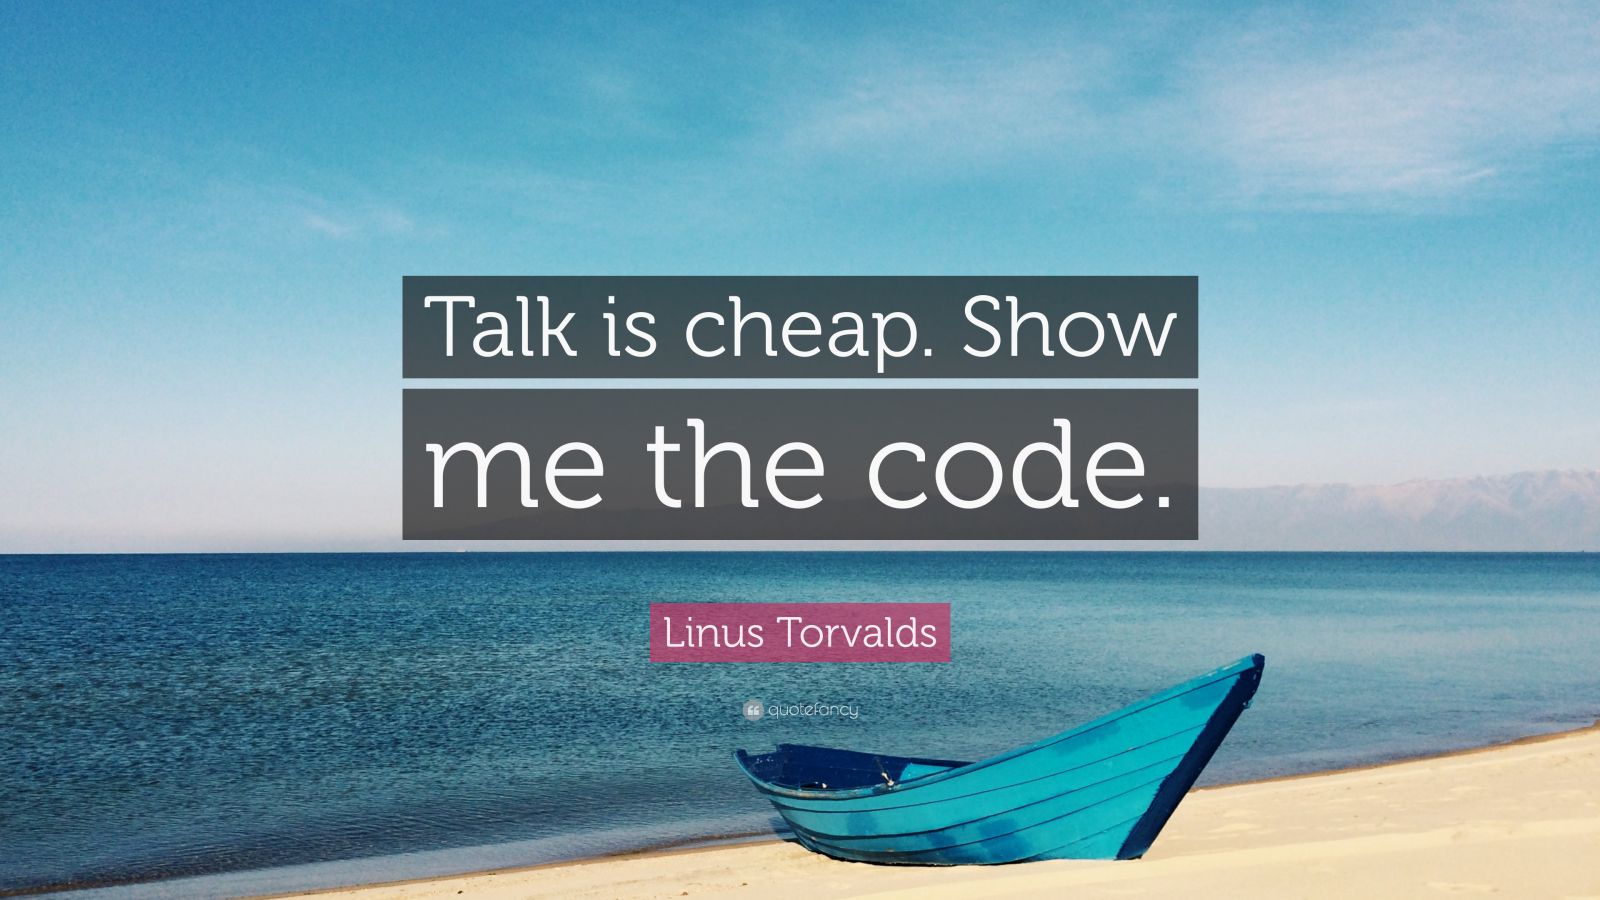 Linus Torvalds Quote: “Talk is cheap. Show me the code.” (14 wallpapers) - Quotefancy